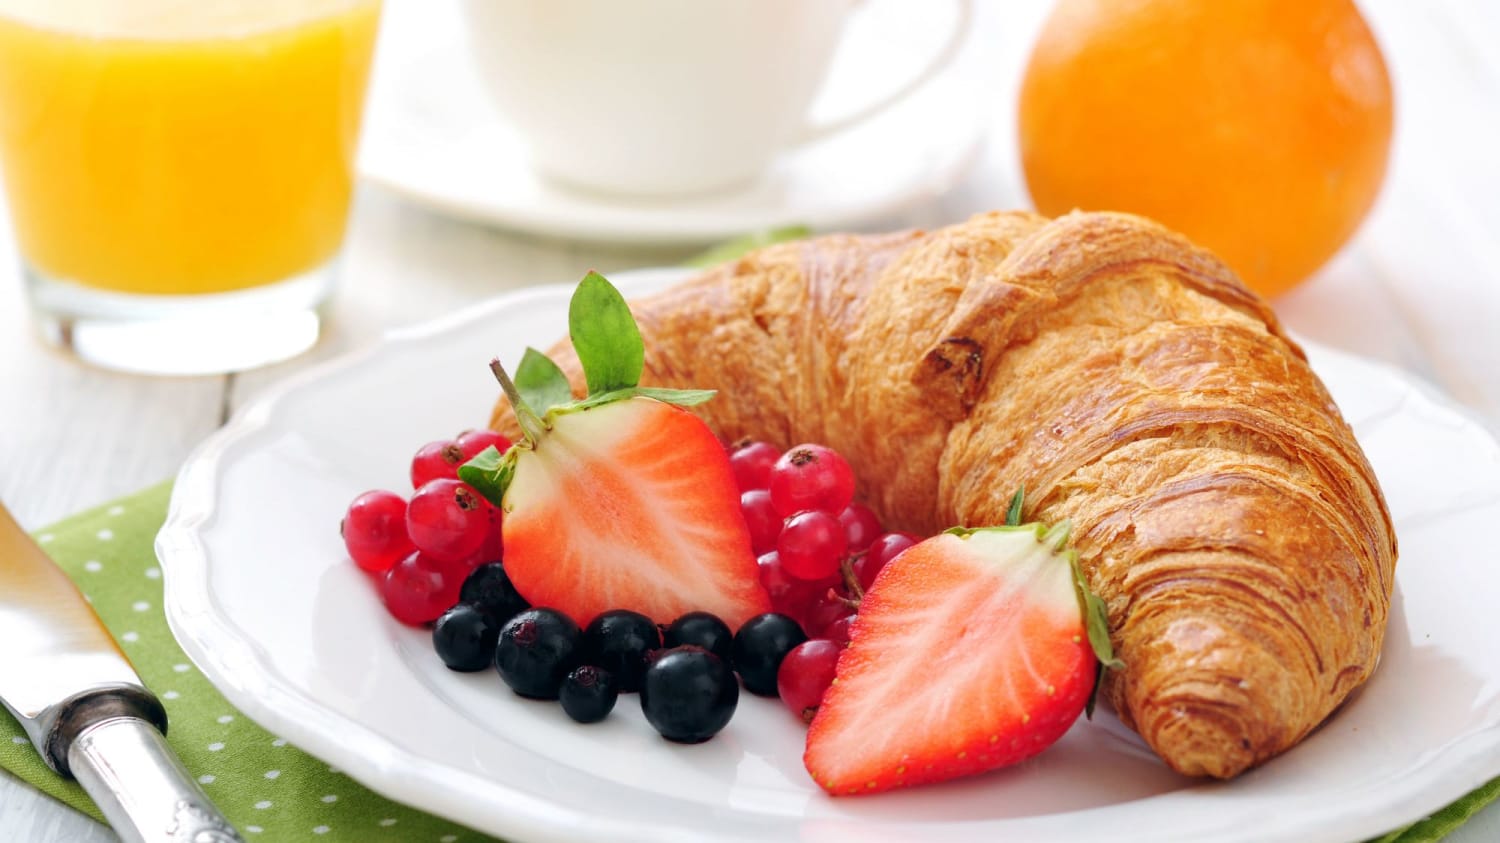 What Makes a Hotel Breakfast 'Continental'?